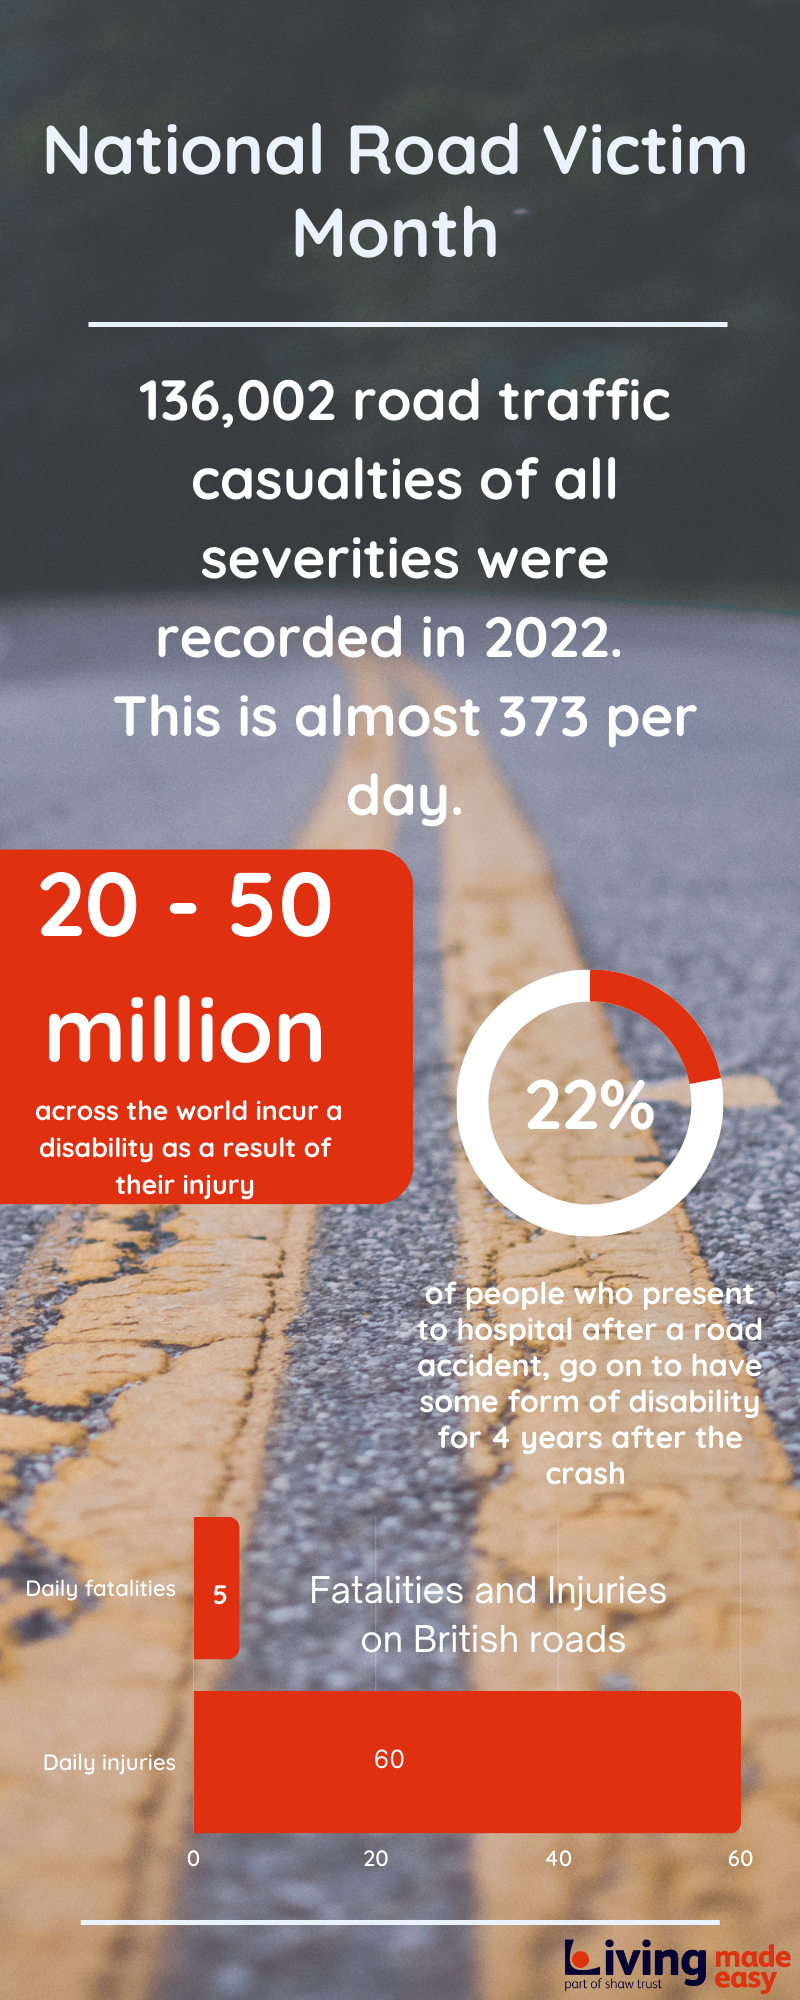 An infographic detailing road accident statistics which are contained in the article. It also contains an image of a road with yellow road marking as the background image.